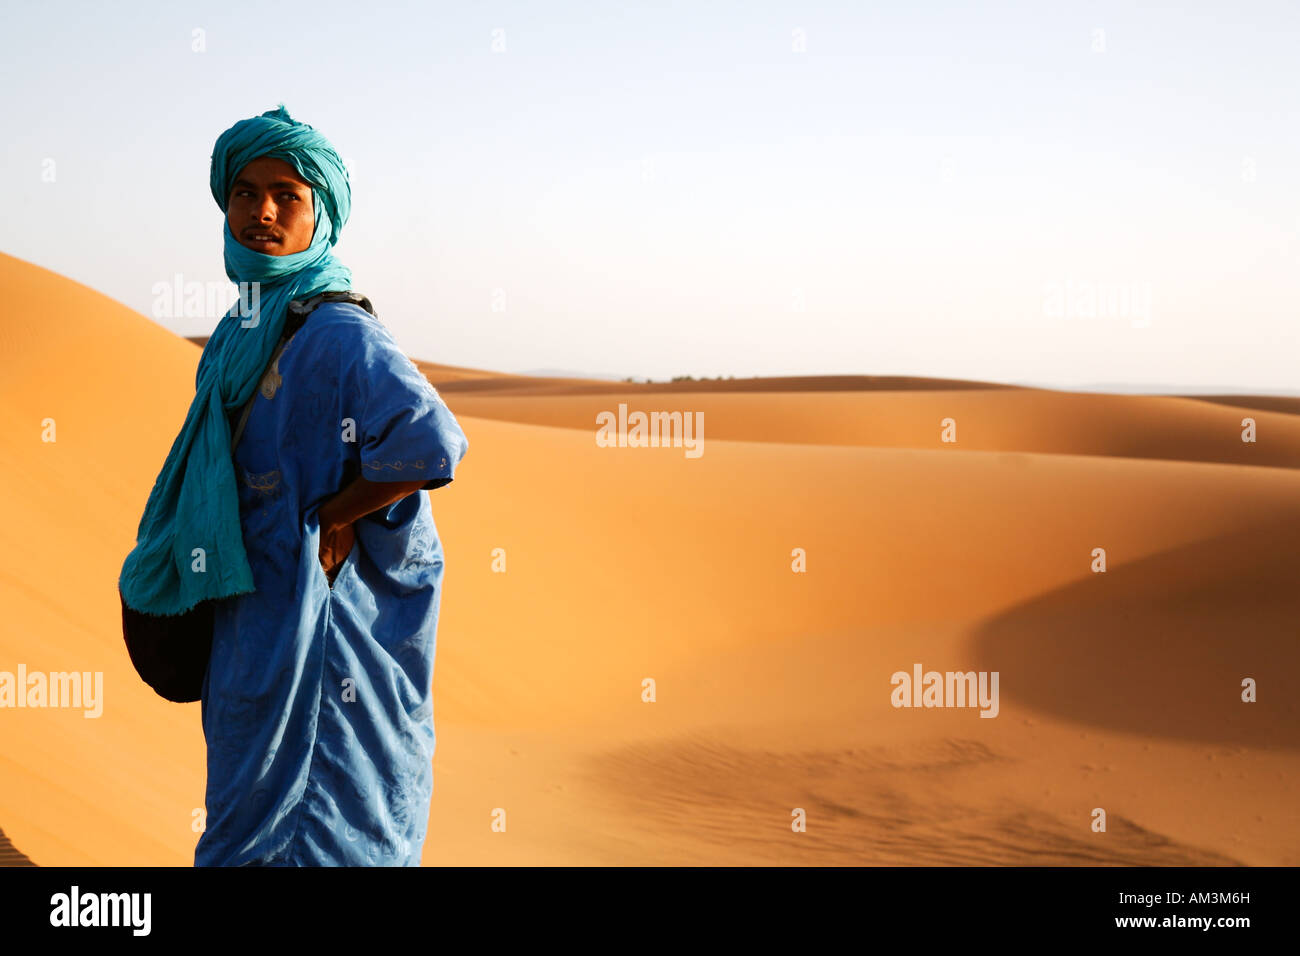 Berber man in traditional blue dress standing in the Moroccan desert, North Africa. Stock Photo